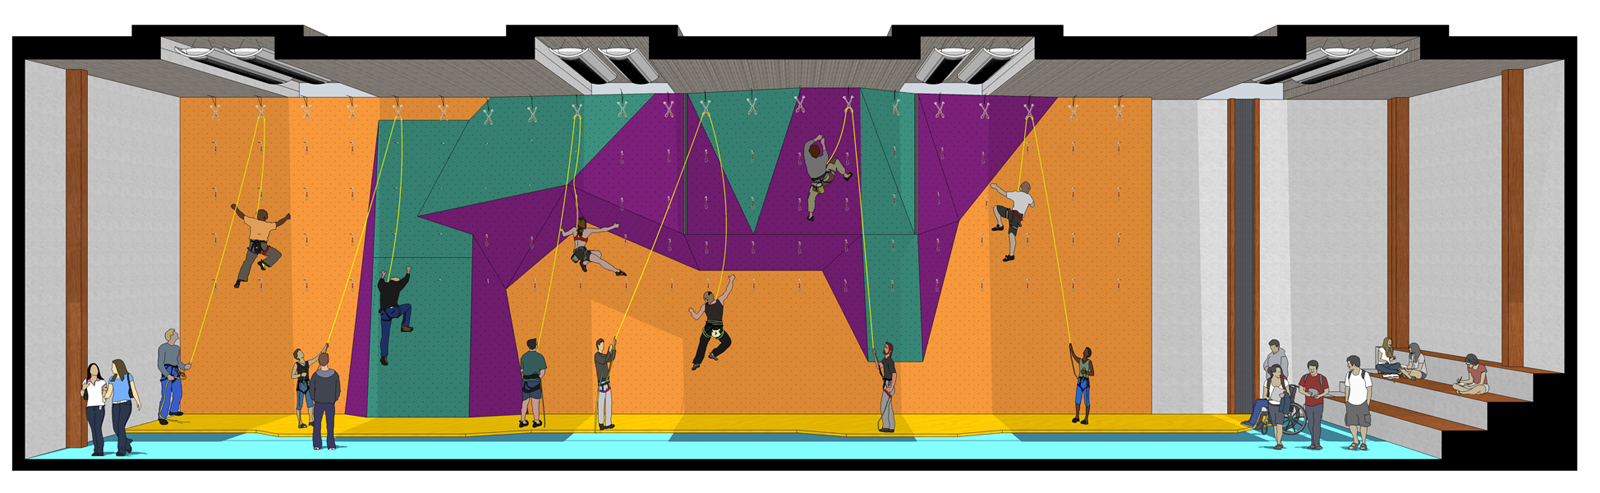 Example of a climbing wall